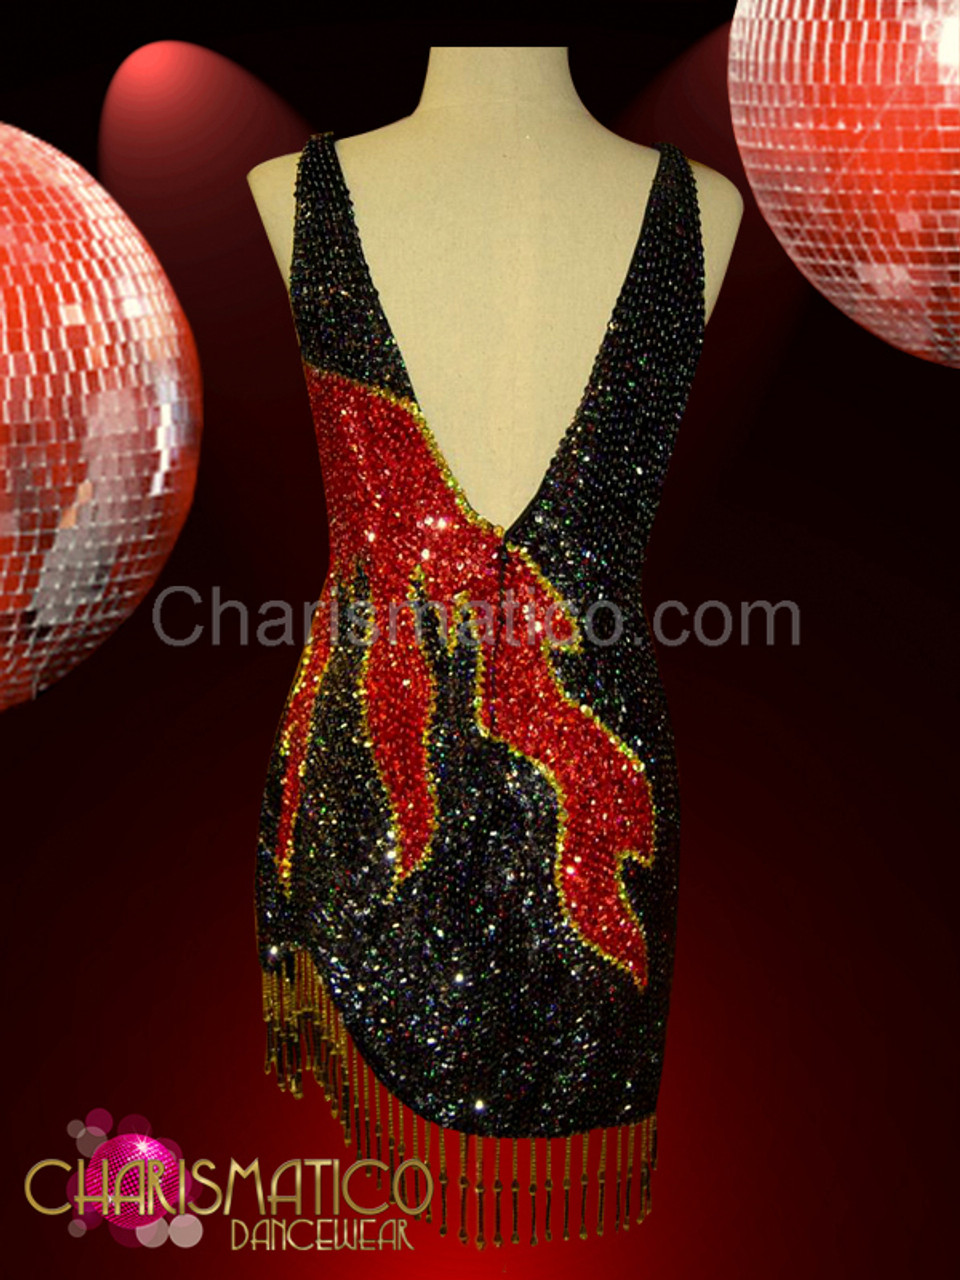 Swirl patterned red showgirl's Dress with laser-cutout diamond sequin Fringe 